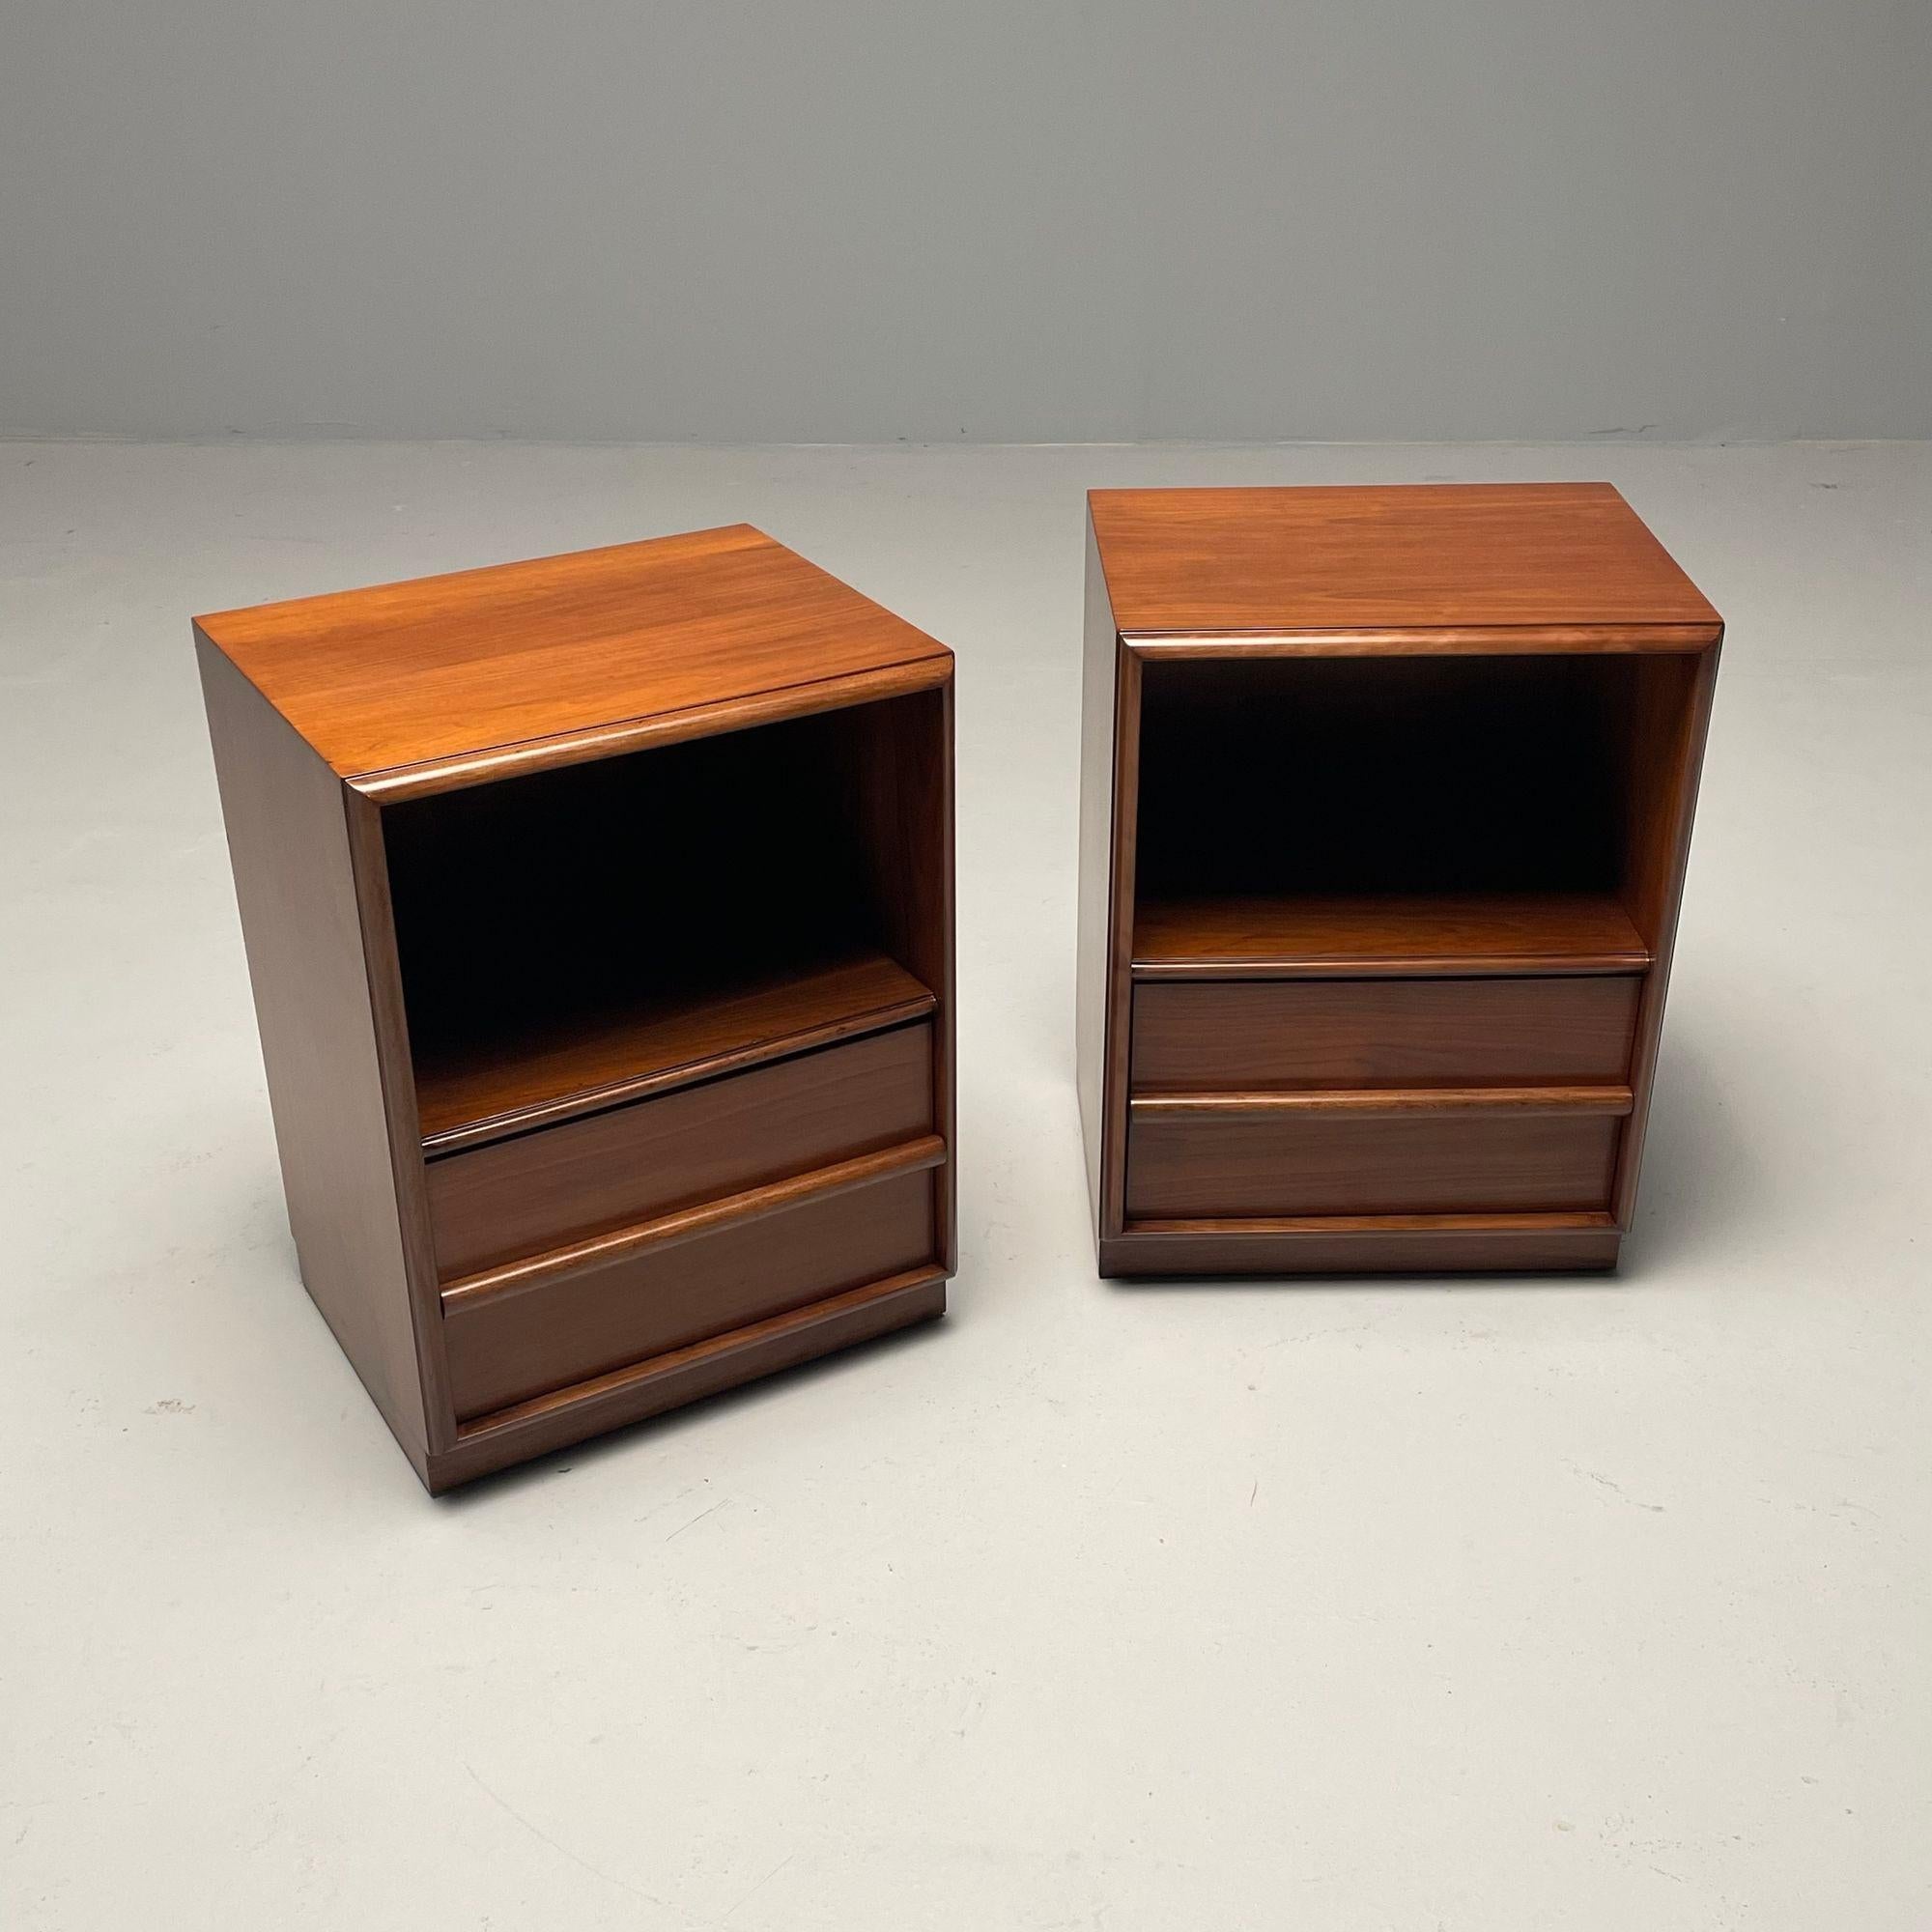 T. H. Robsjohn-Gibbings, Widdicomb Mid-Century Modern, Nightstands, Walnut, USA 1960s

A pair of bedside stands or side tables designed by Robsjohn-Gibbings for Widdicomb. Each having a large single drawer cut to appear as double drawers under an